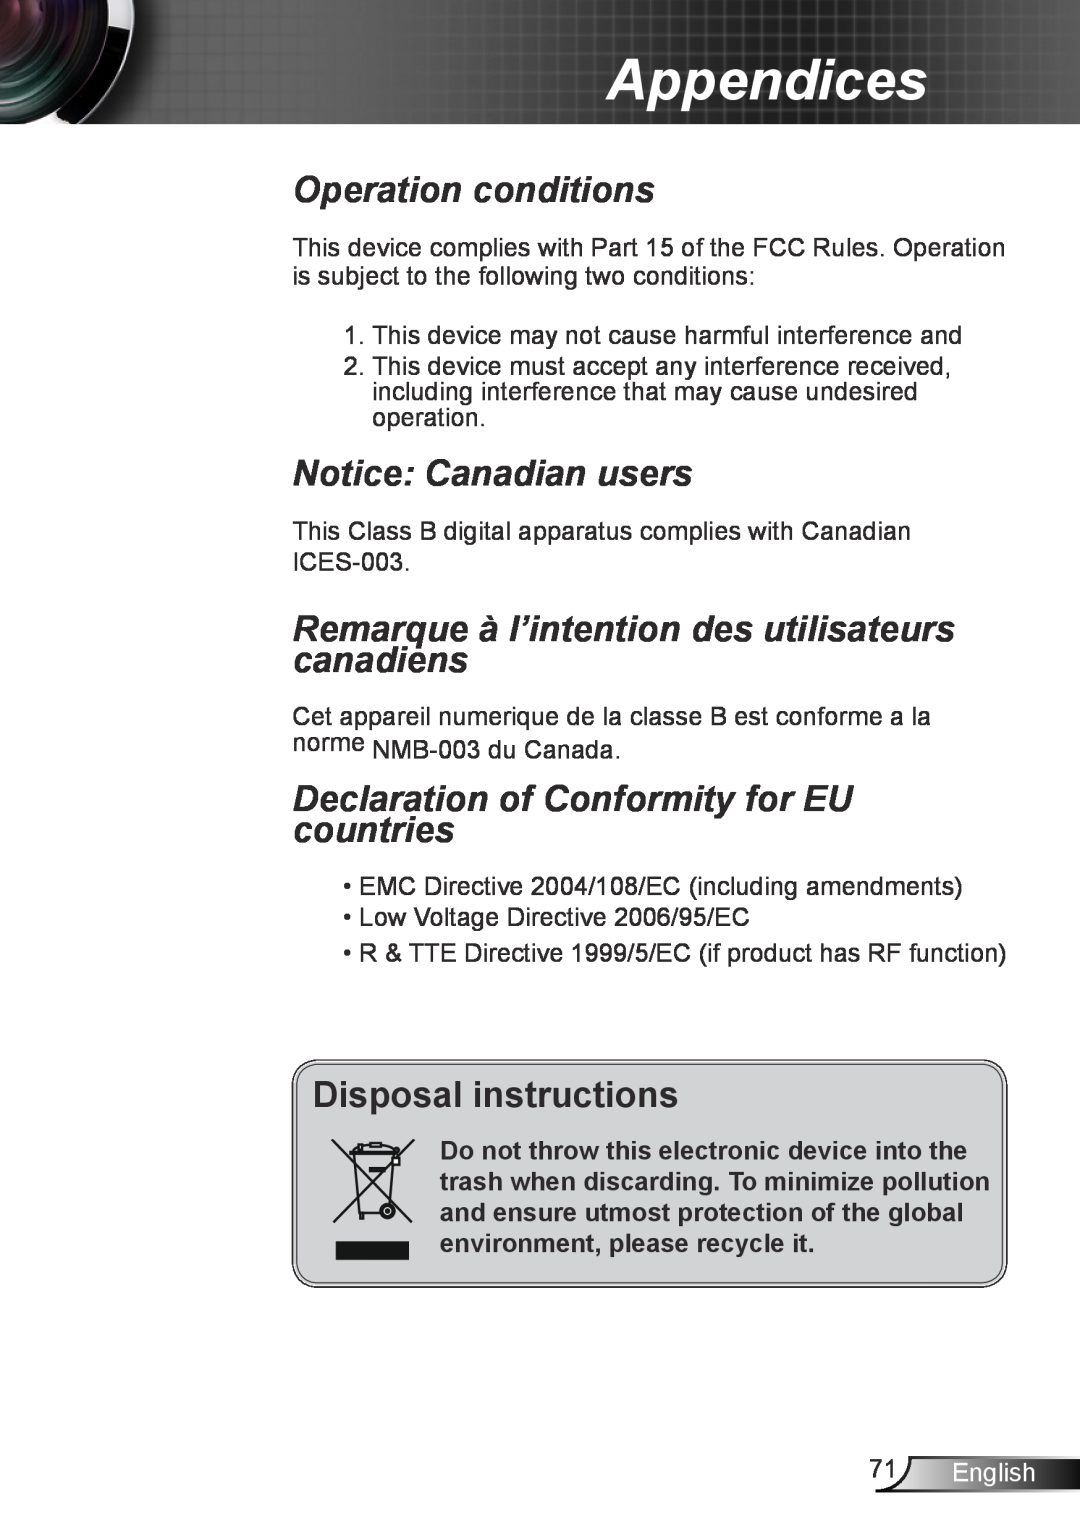 Optoma Technology TW695UT3D Operation conditions, Notice Canadian users, Remarque à l’intention des utilisateurs canadiens 